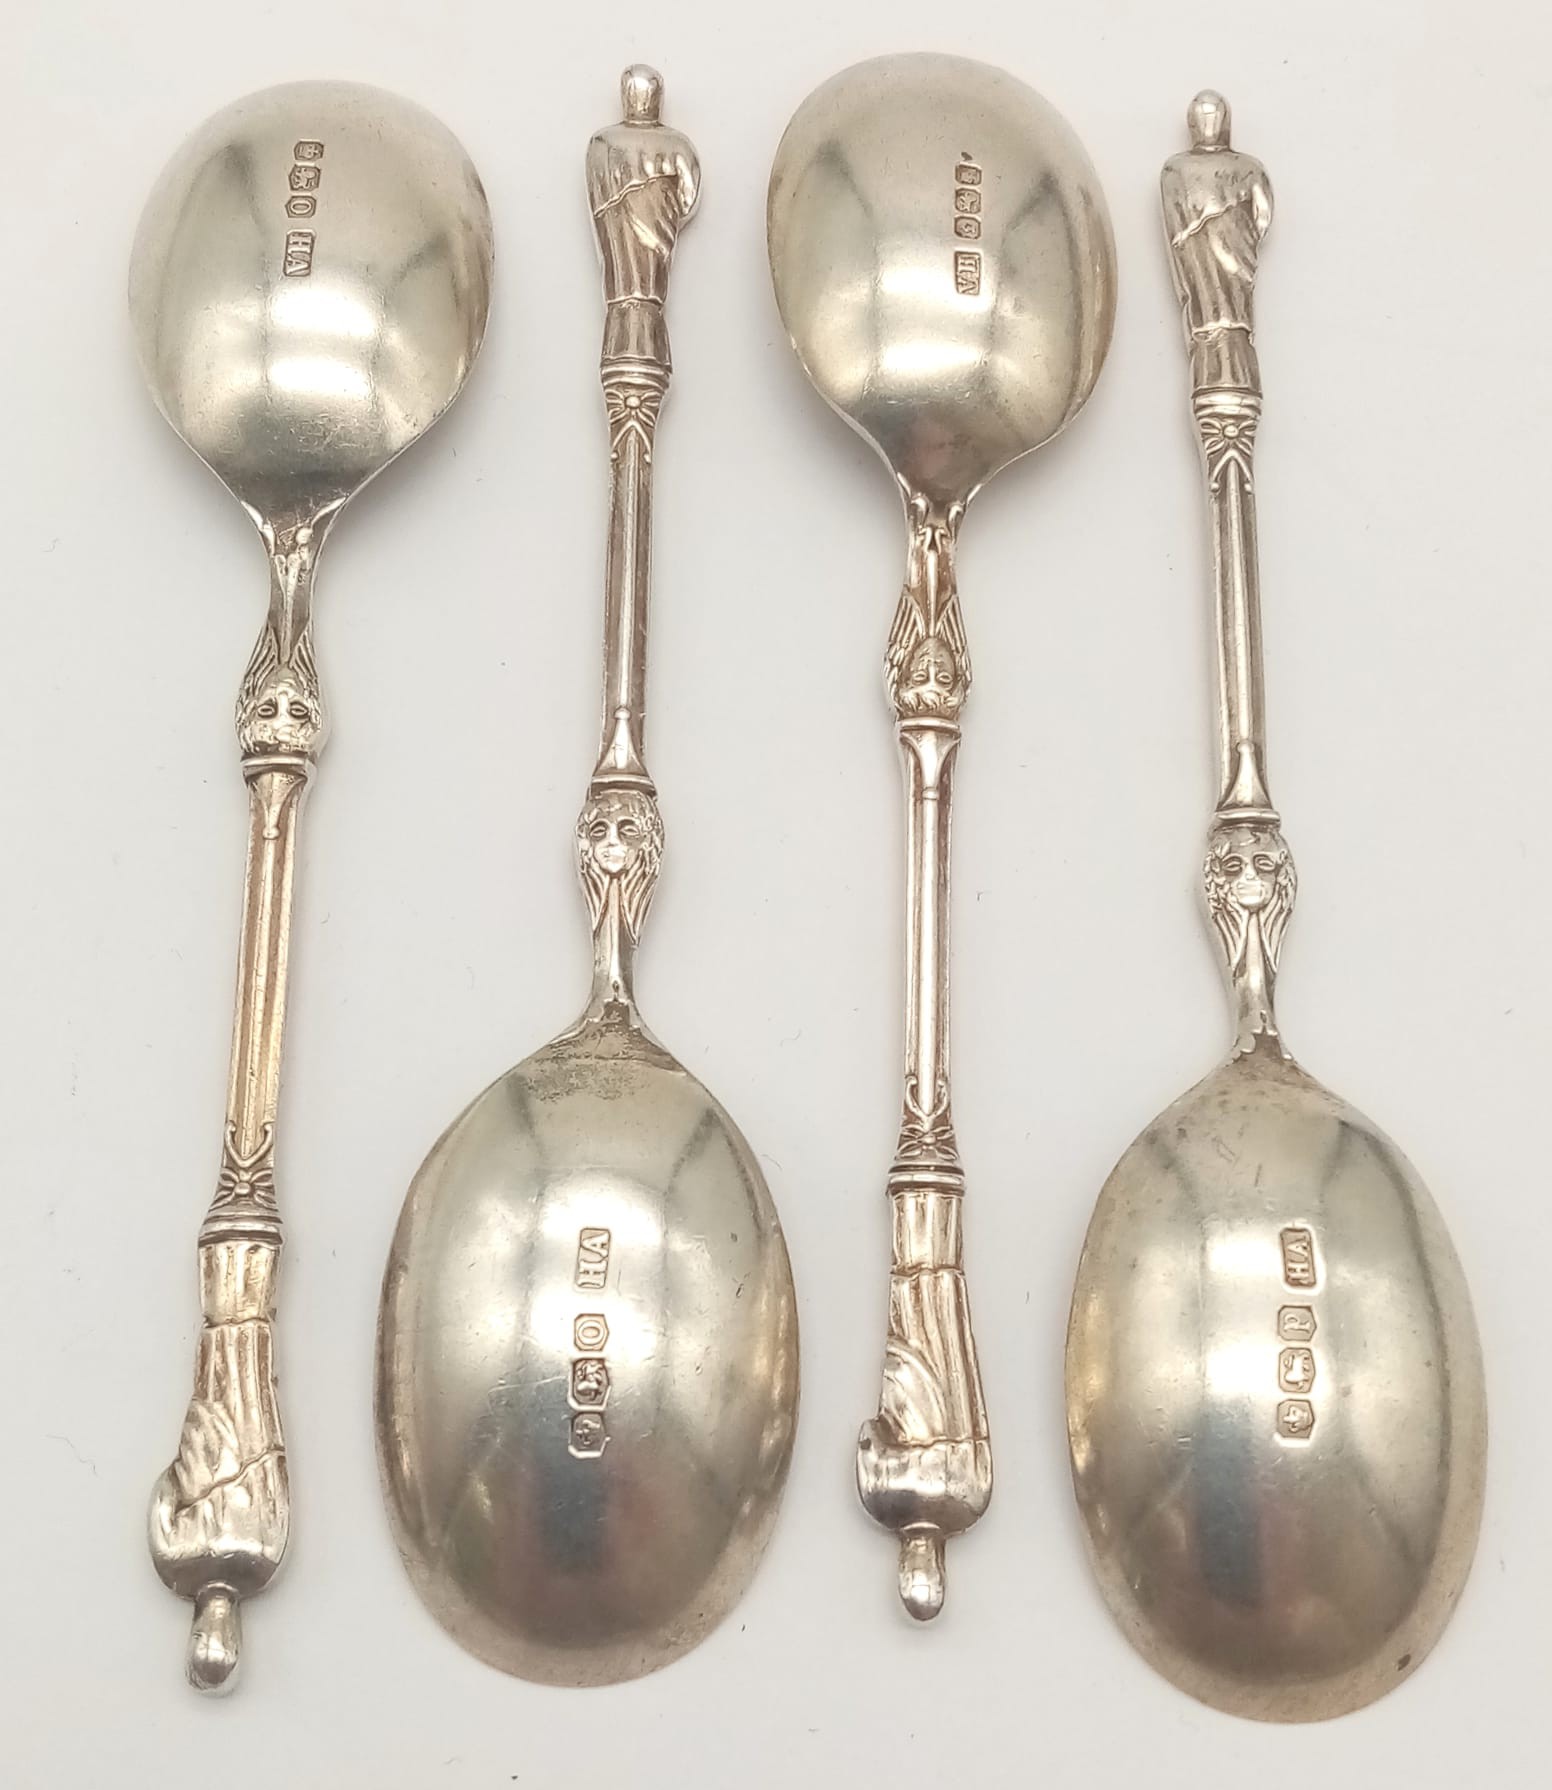 An Antique Mixed Solid Silver Teaspoons Lot. Four with a religious symbol handle. Sugar nips also - Image 10 of 12